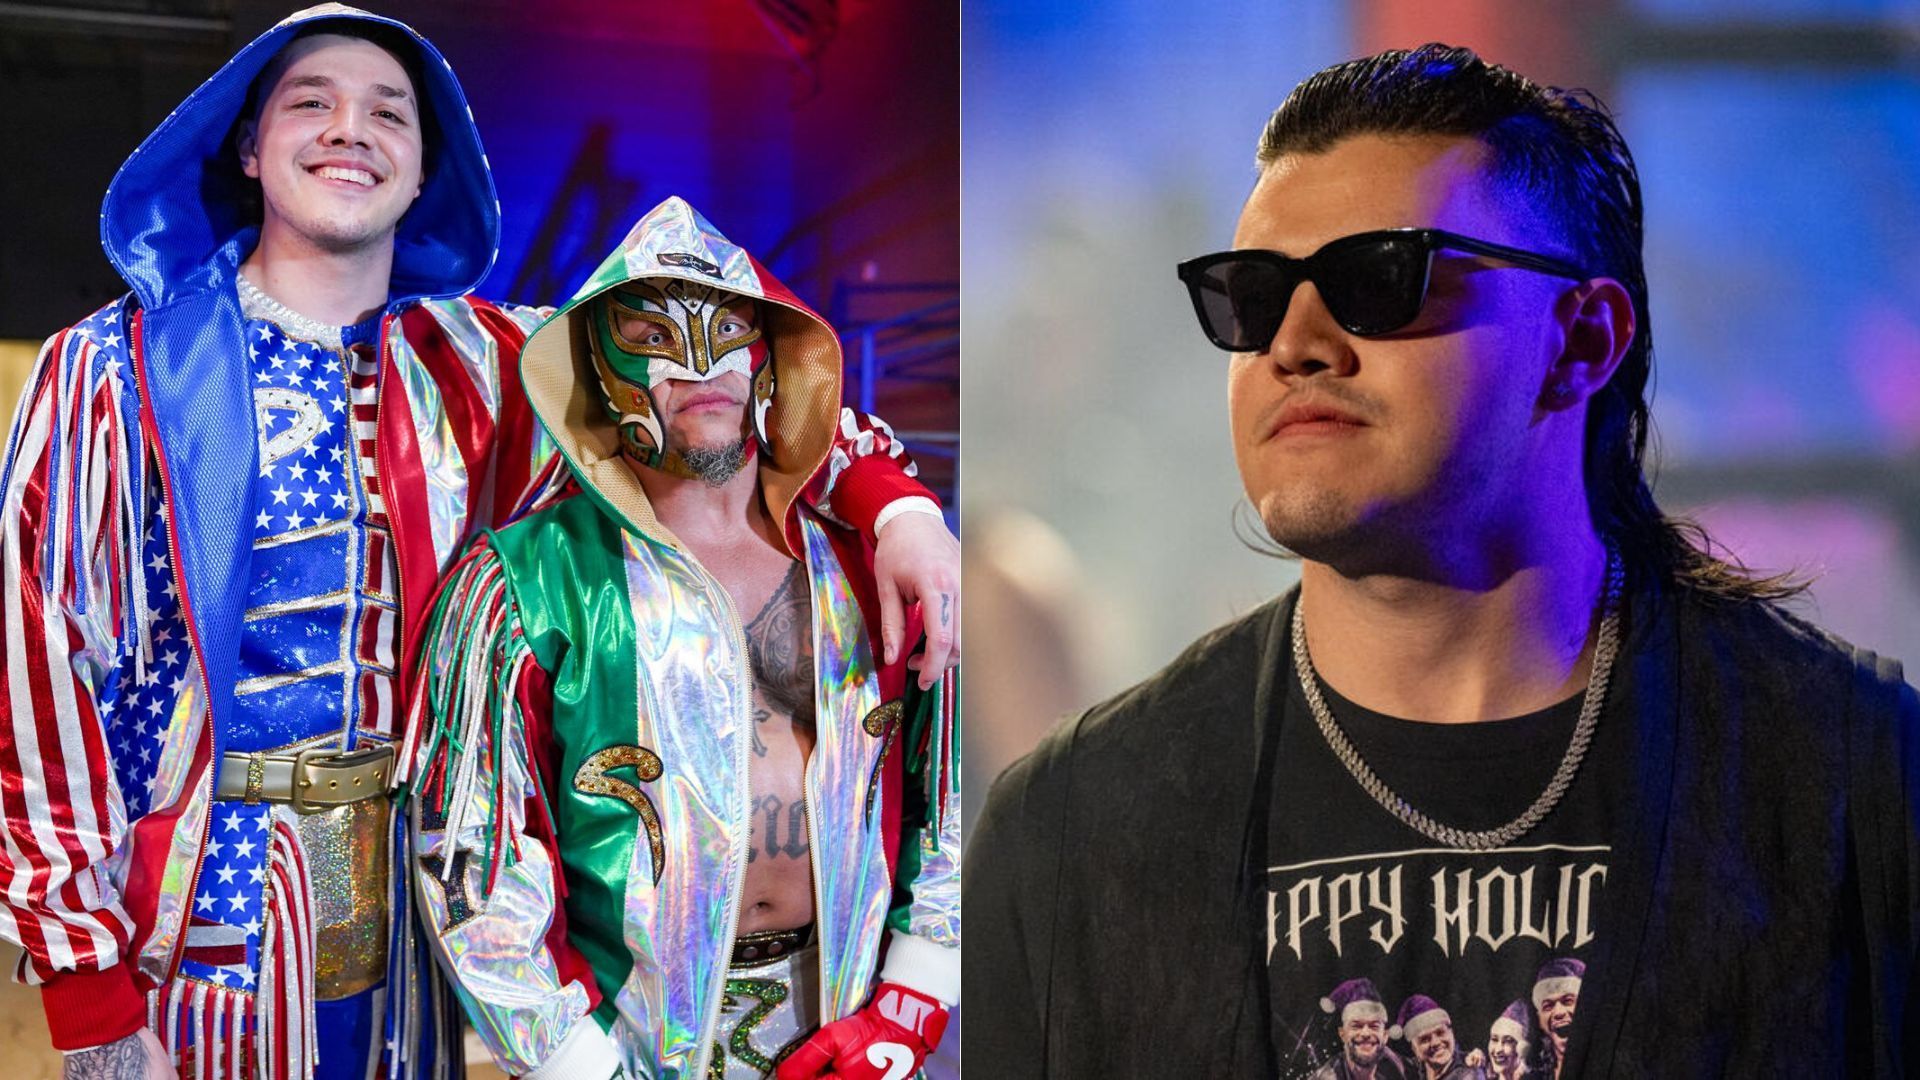 Dominik Mysterio and Rey Mysterio will face off at WrestleMania again